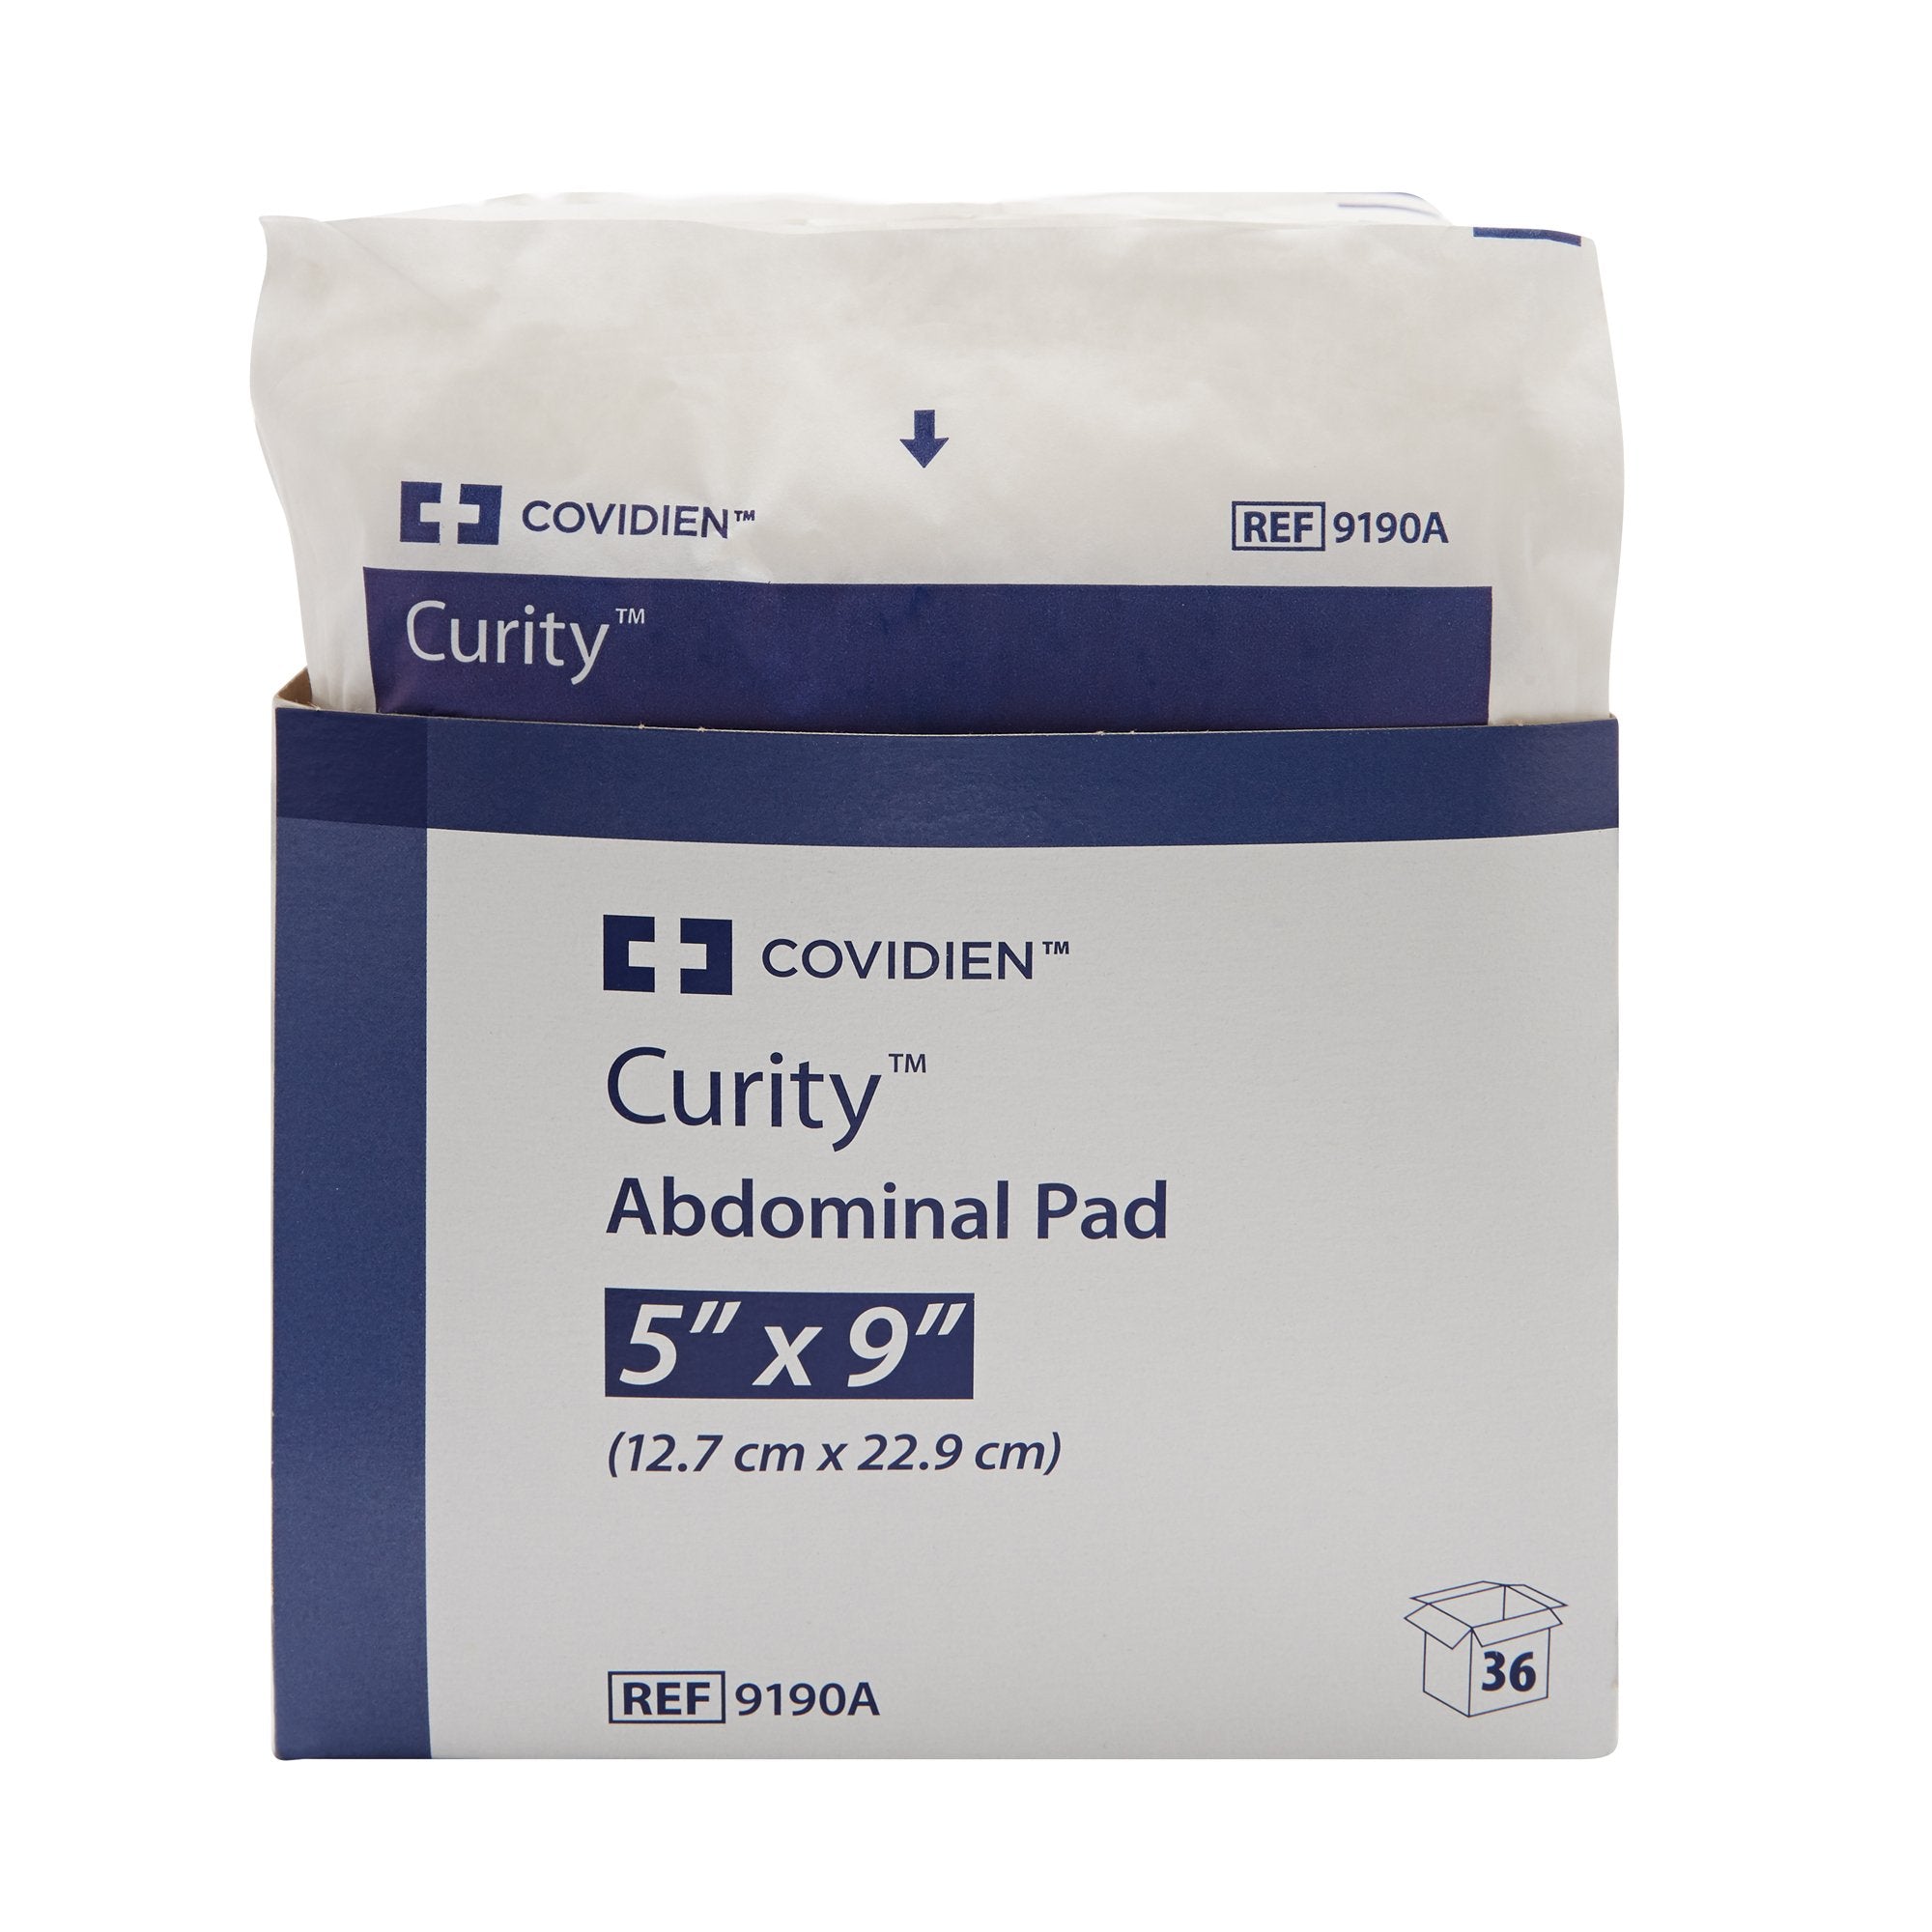 Abdominal Pad Curity™ 5 X 9 Inch 1 per Pack Sterile Rectangle